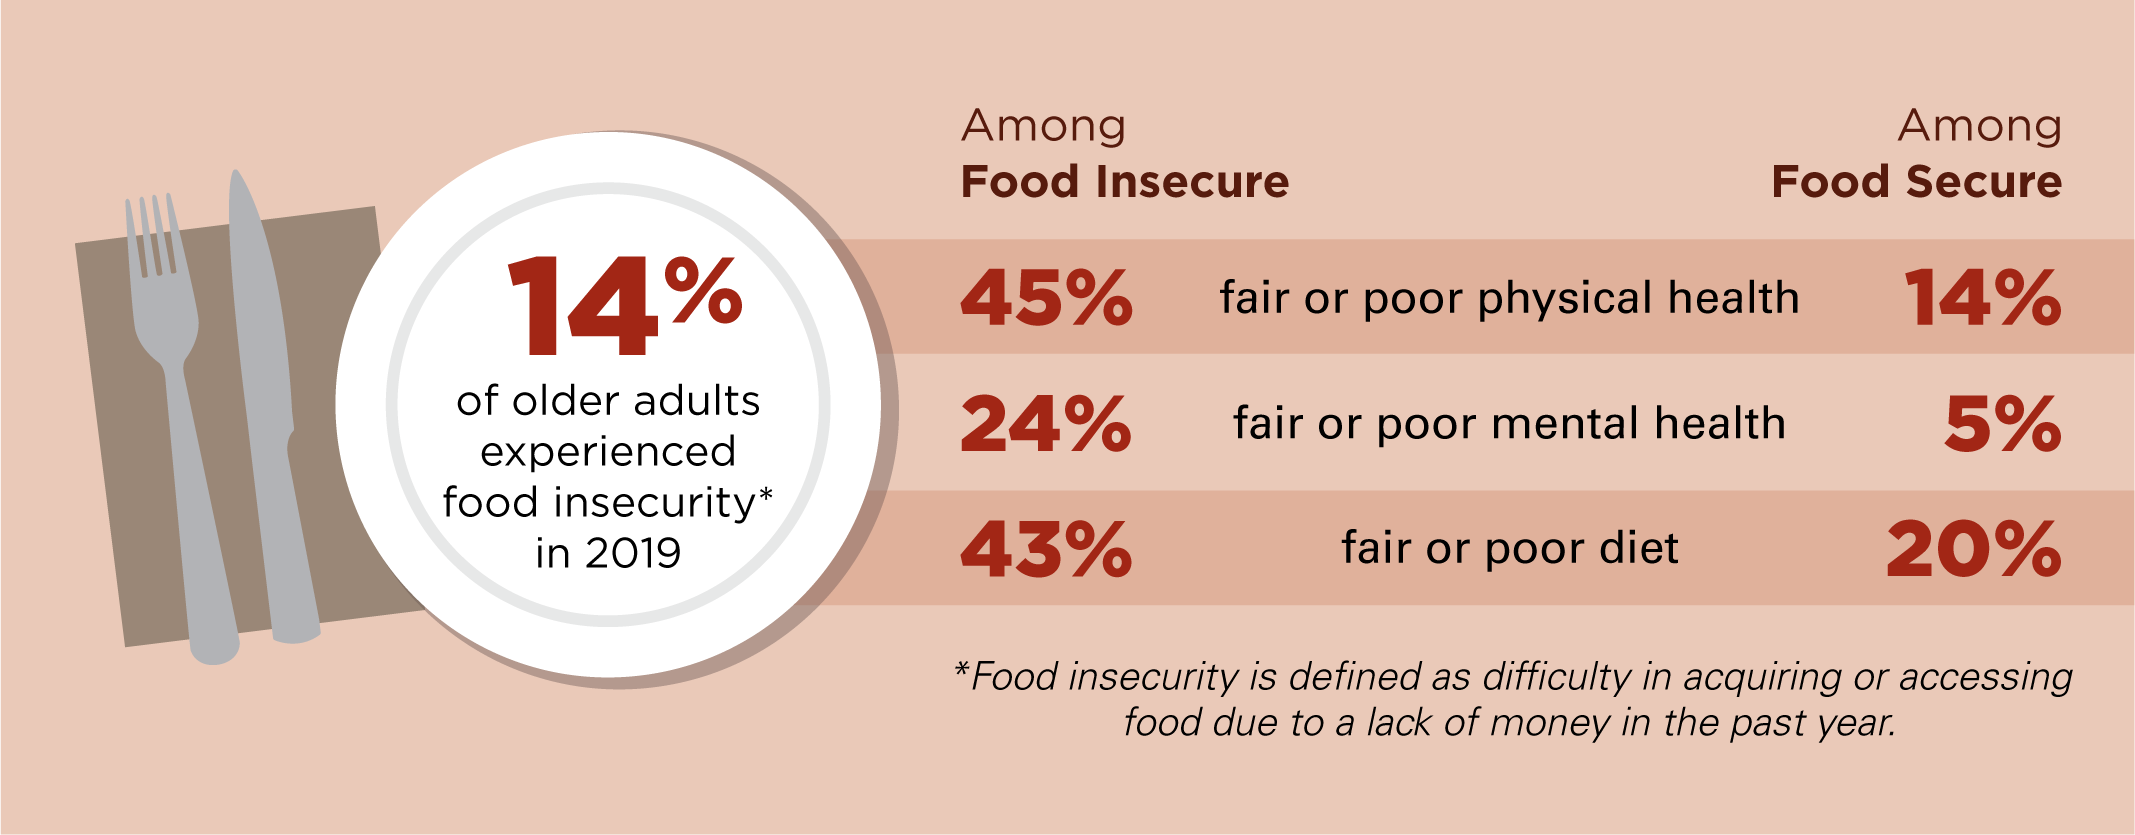 why are older adults at risk for food insecurity? 2